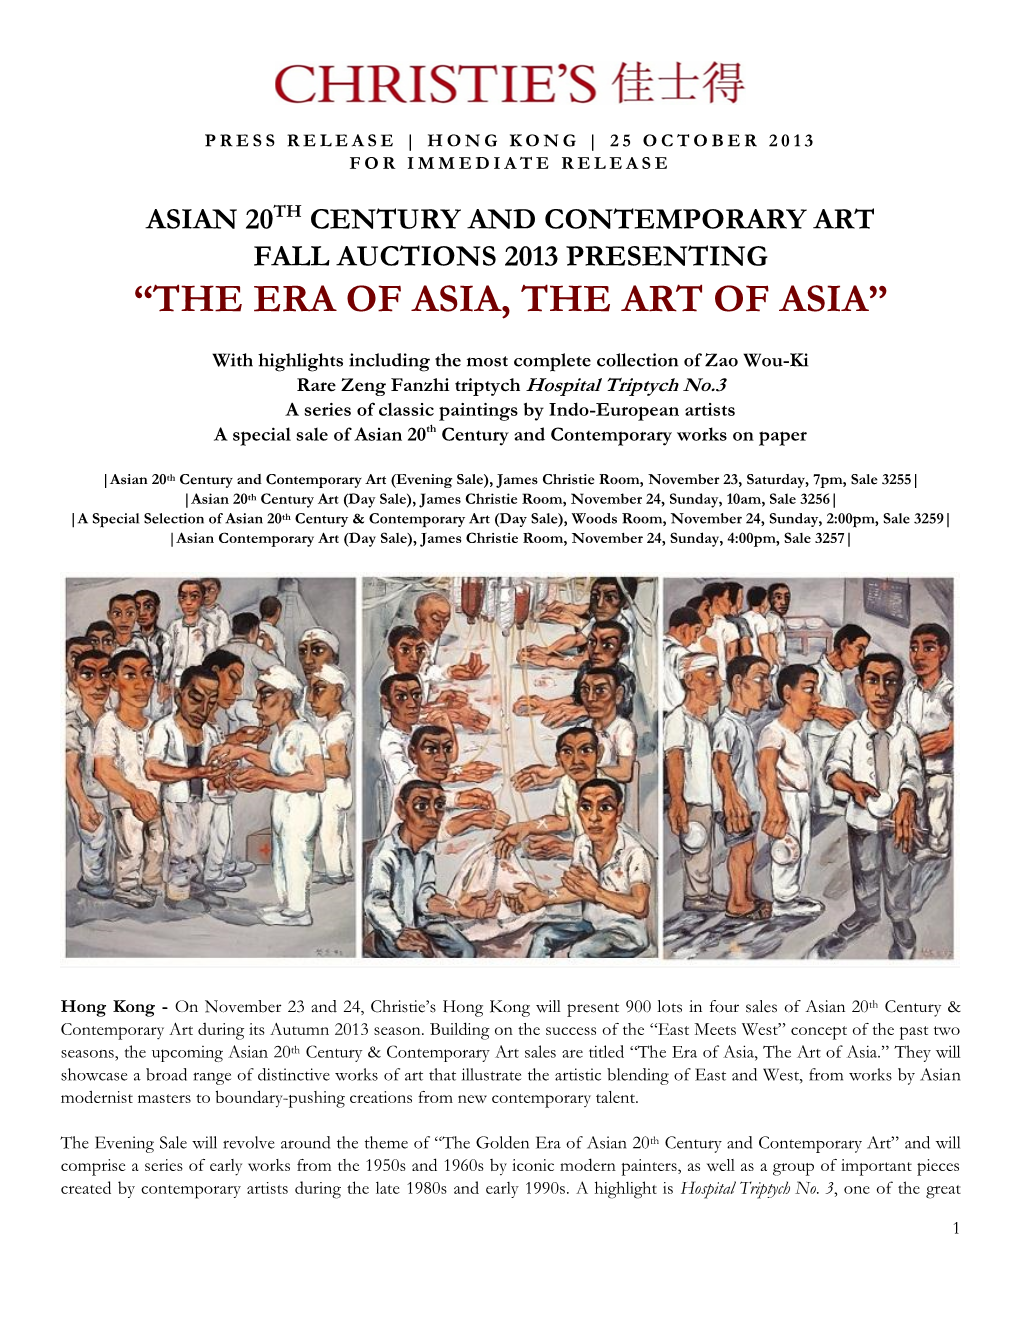 “The Era of Asia, the Art of Asia”